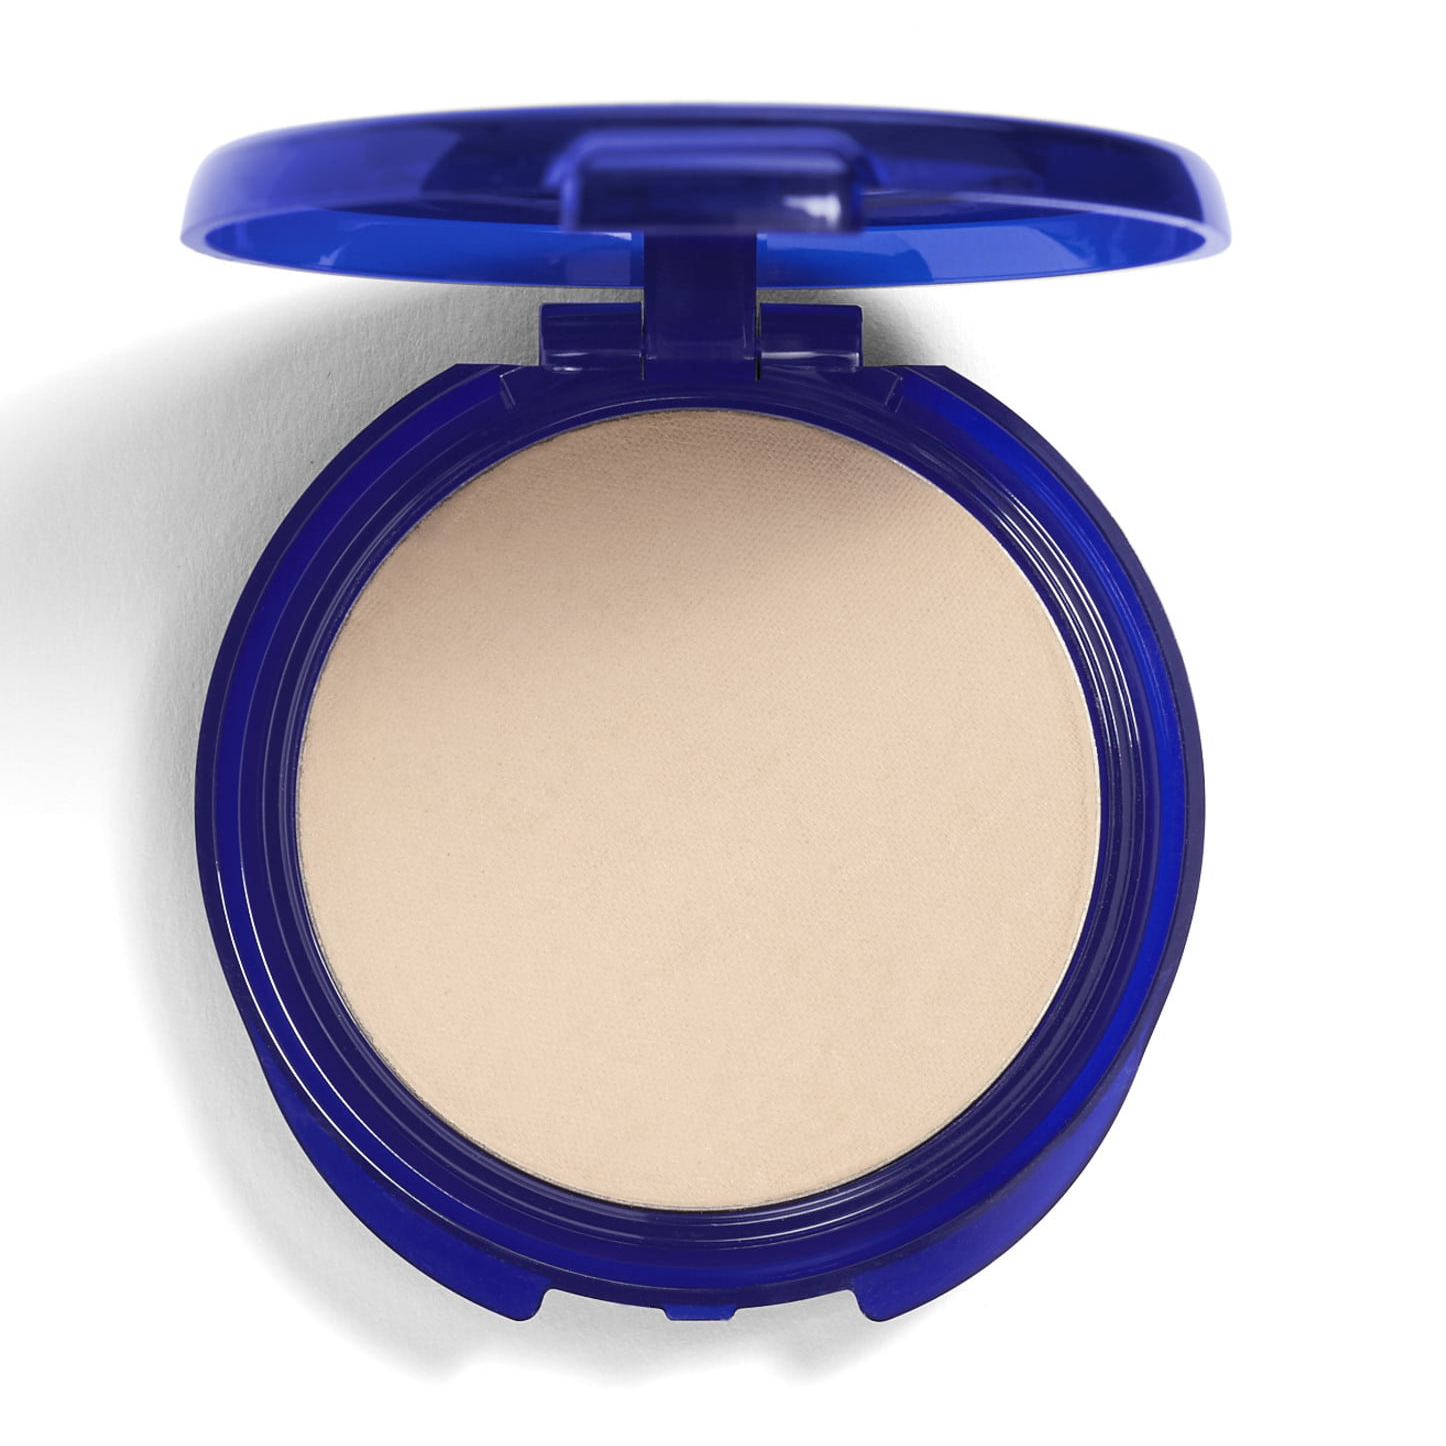 COVERGIRL Smoothers Pressed Powder, 710 Translucent Light, 0.32 oz - image 1 of 9